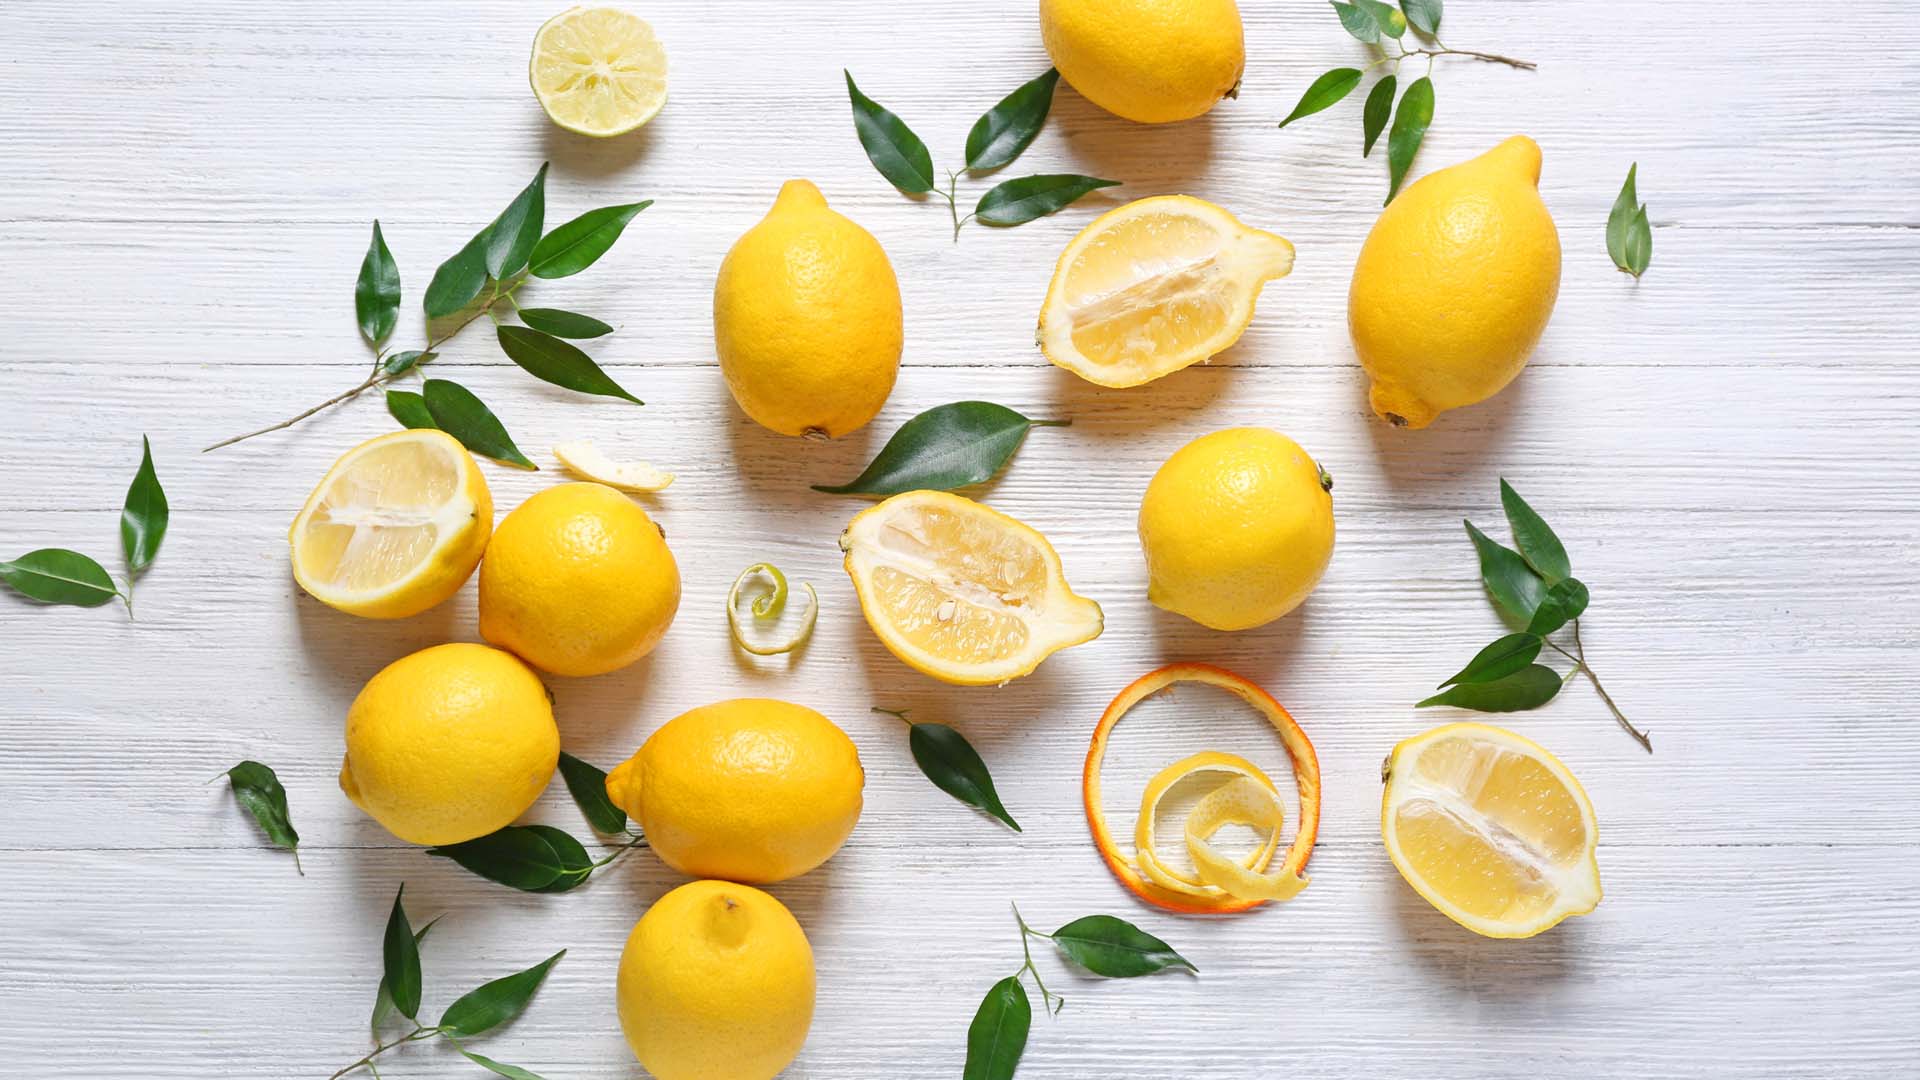 A flat lay of whole and cut lemons with their leaves